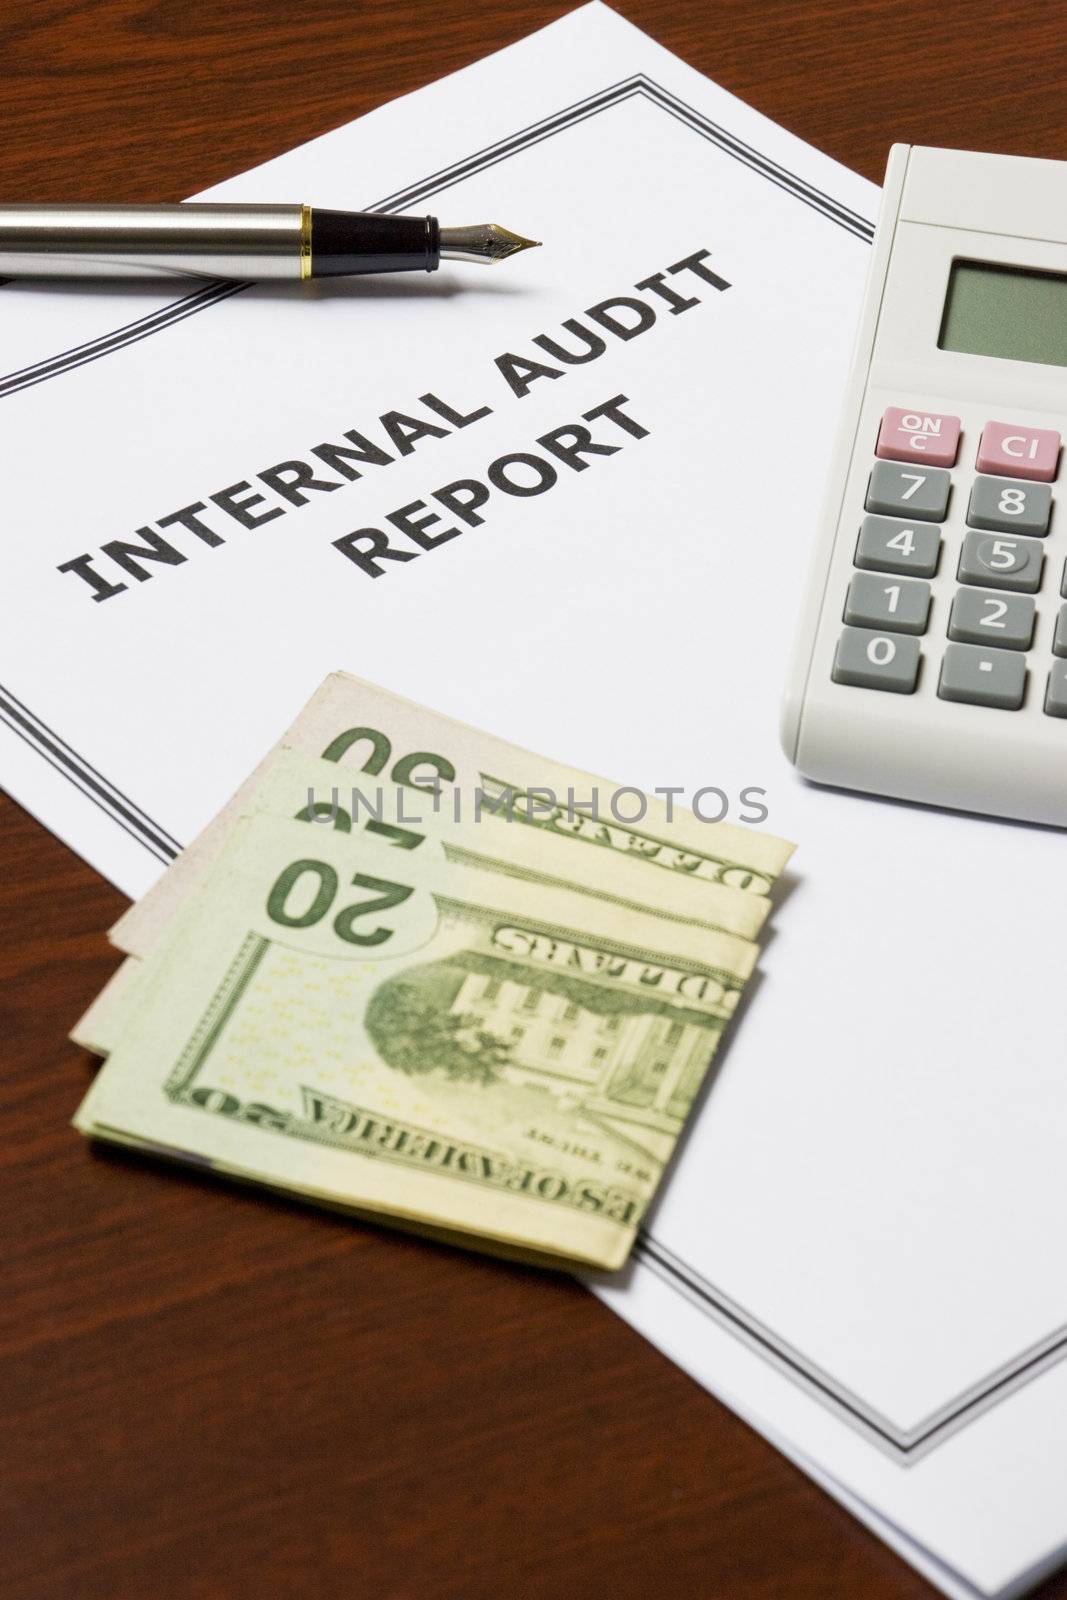 Image of an internal audit report on an office table.